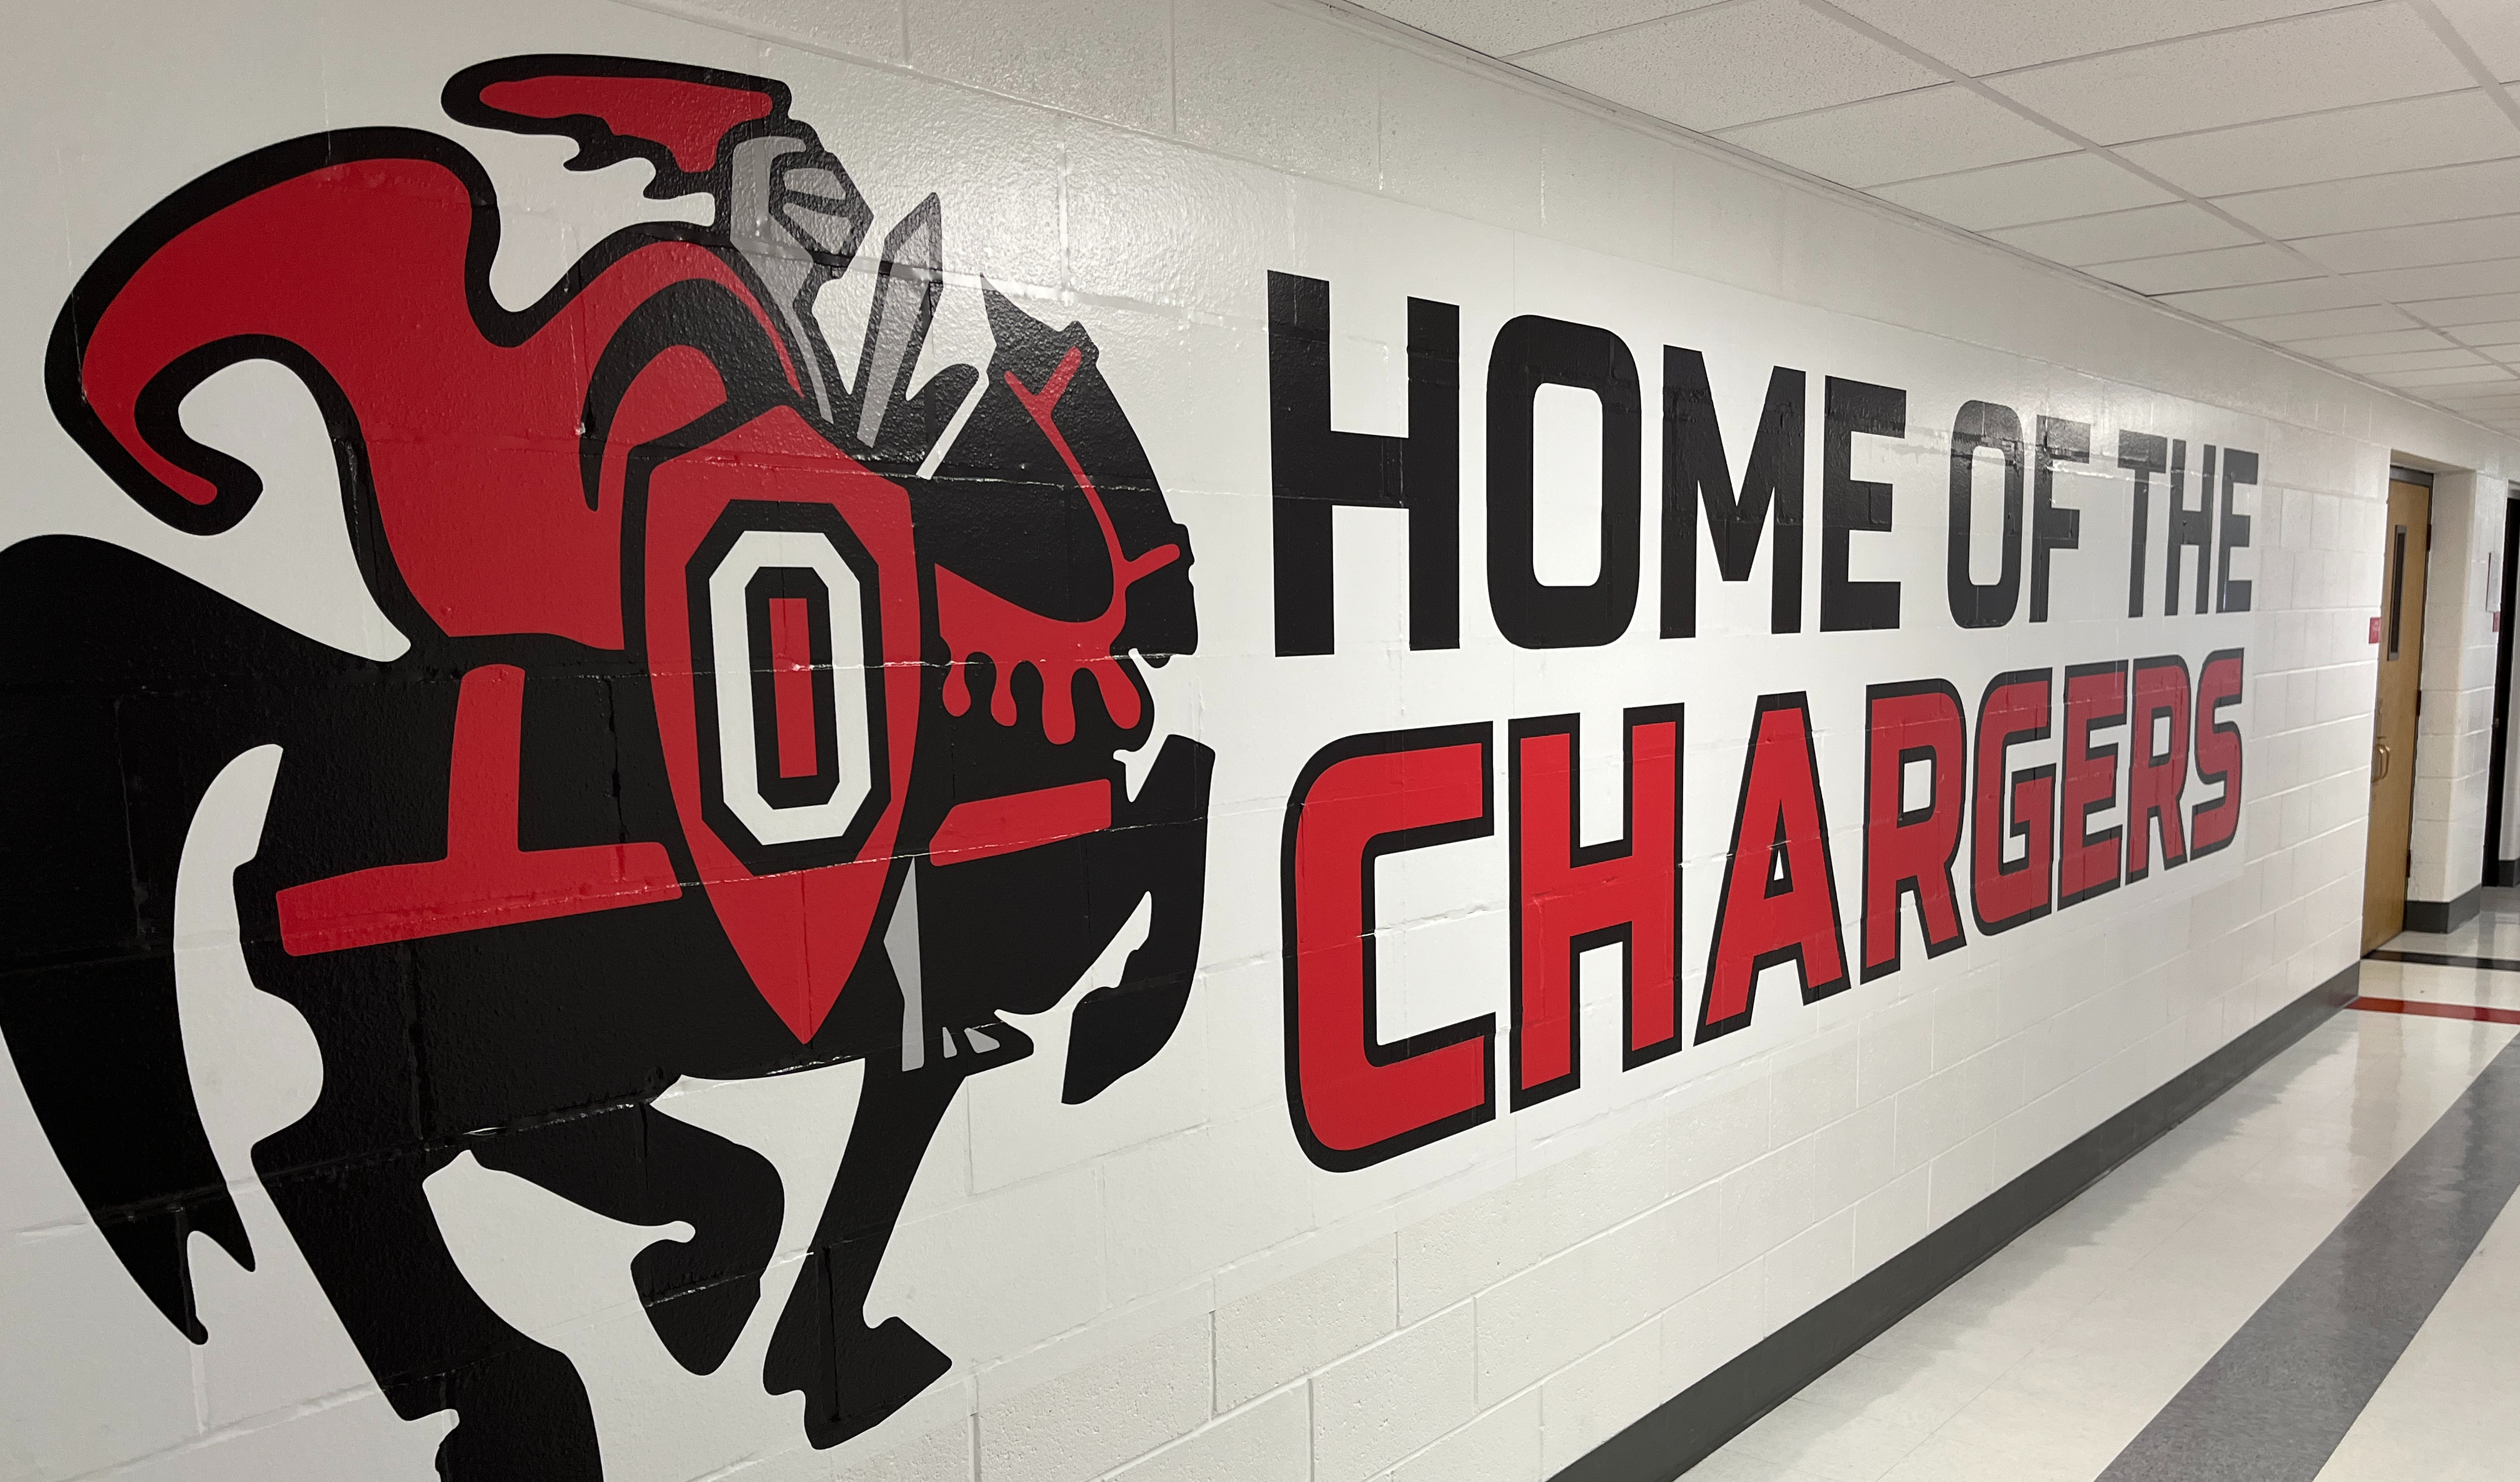 Home of the Chargers wall art at CR Hanna